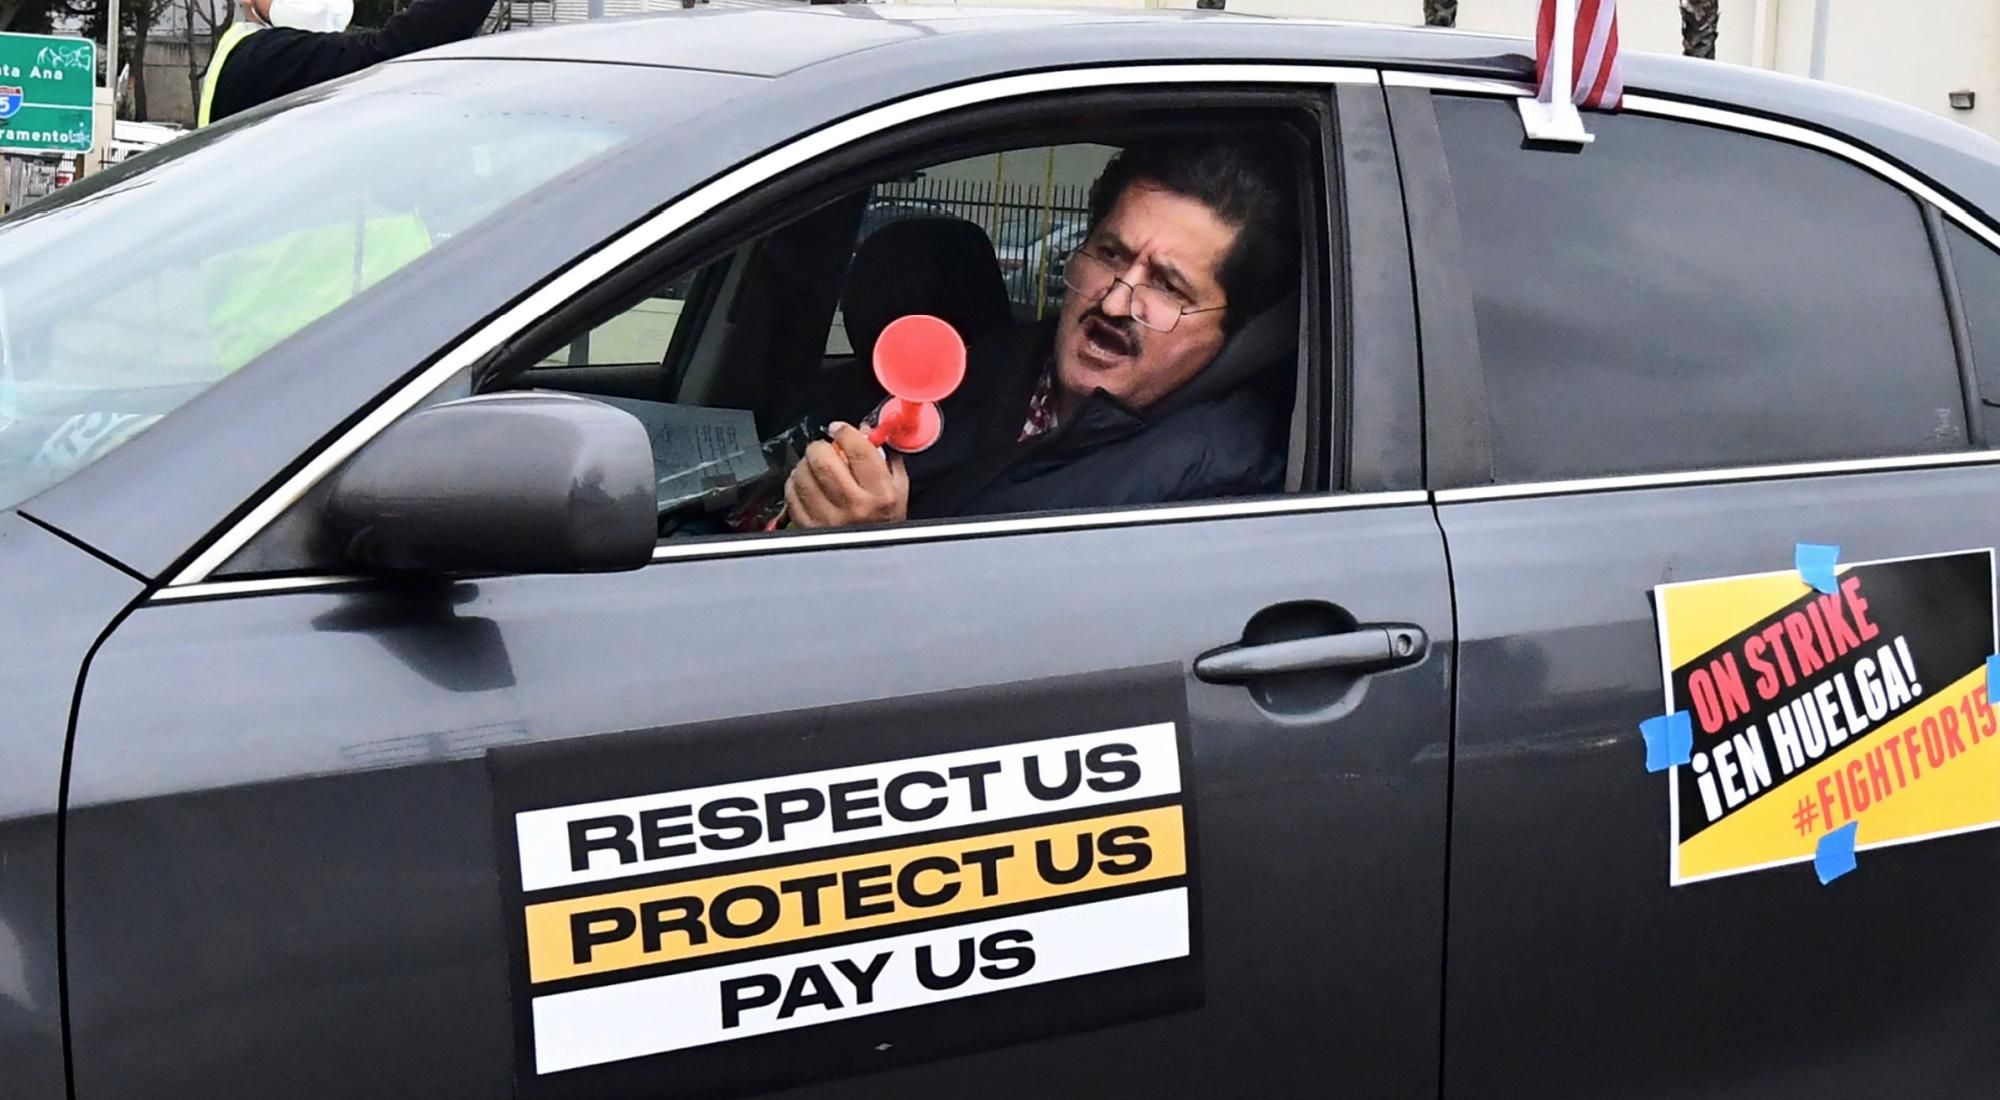 Food delivery driver Jorge Vargas honks a horn while driving his vehicle in a car caravan strike by fast food workers and their supporters on February 9, 2021 in Los Angeles. (Photo: Frederic J. Brown/AFP via Getty Images)